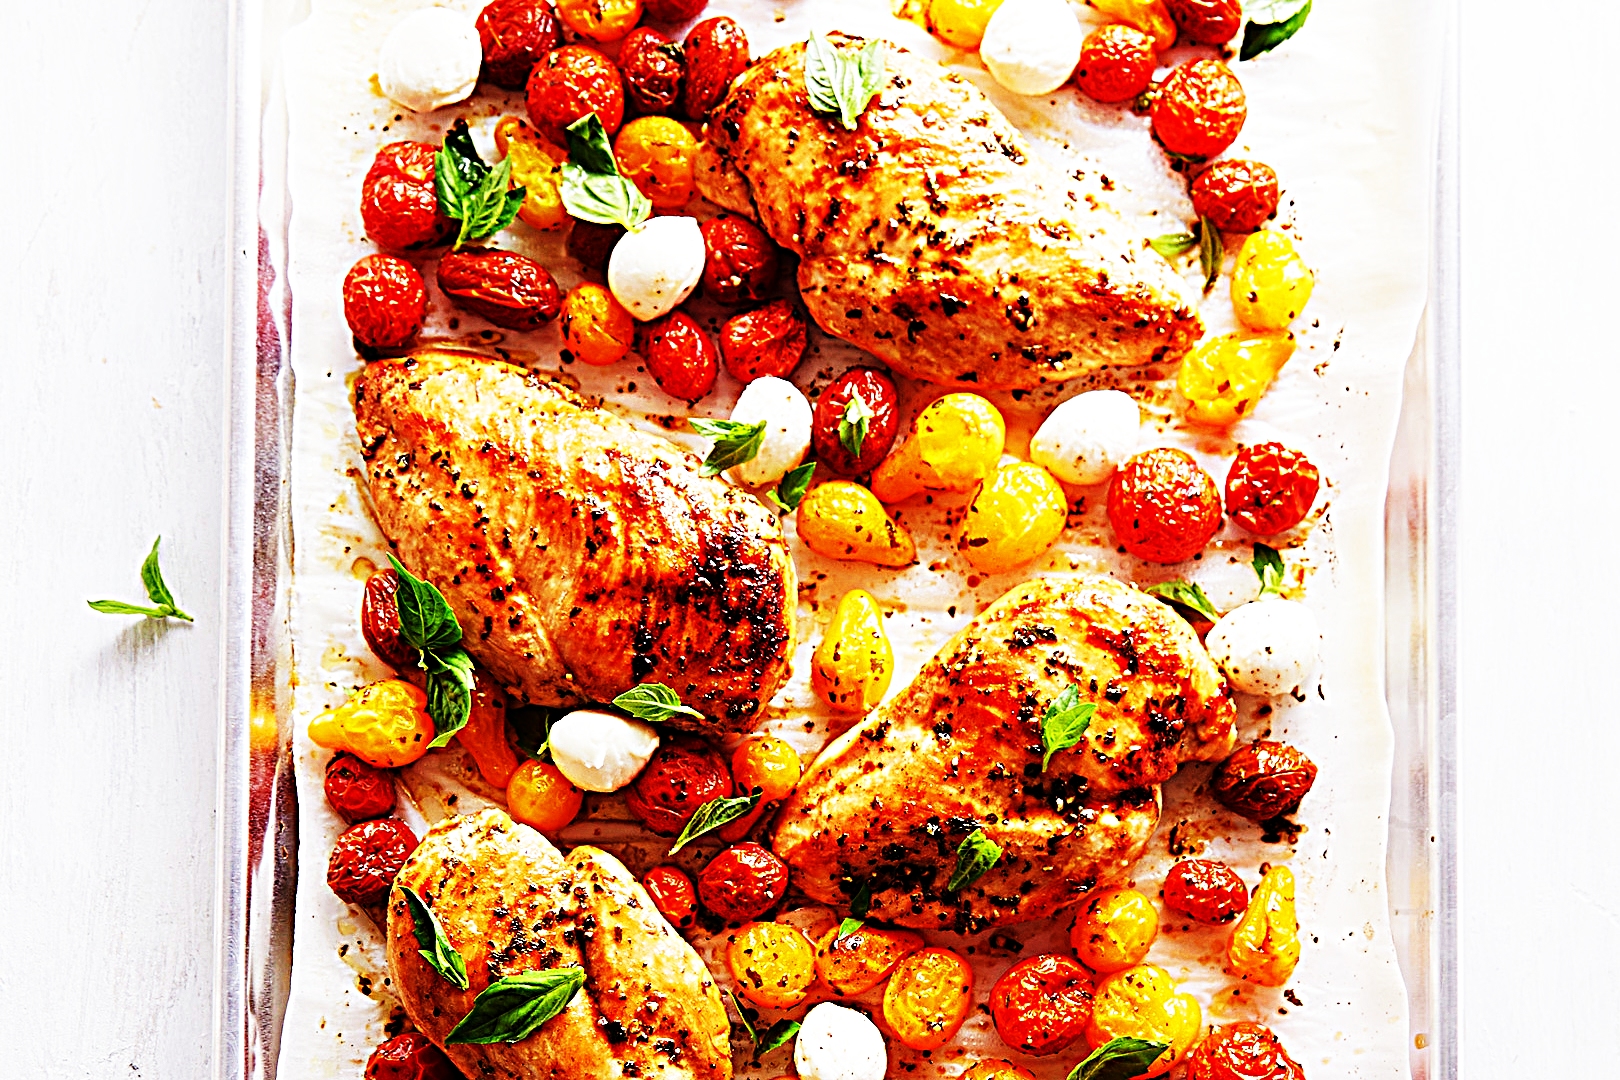 Stupid-Easy Recipe for Sheet Pan Italian Chicken Dinner (#1 Top-Rated)